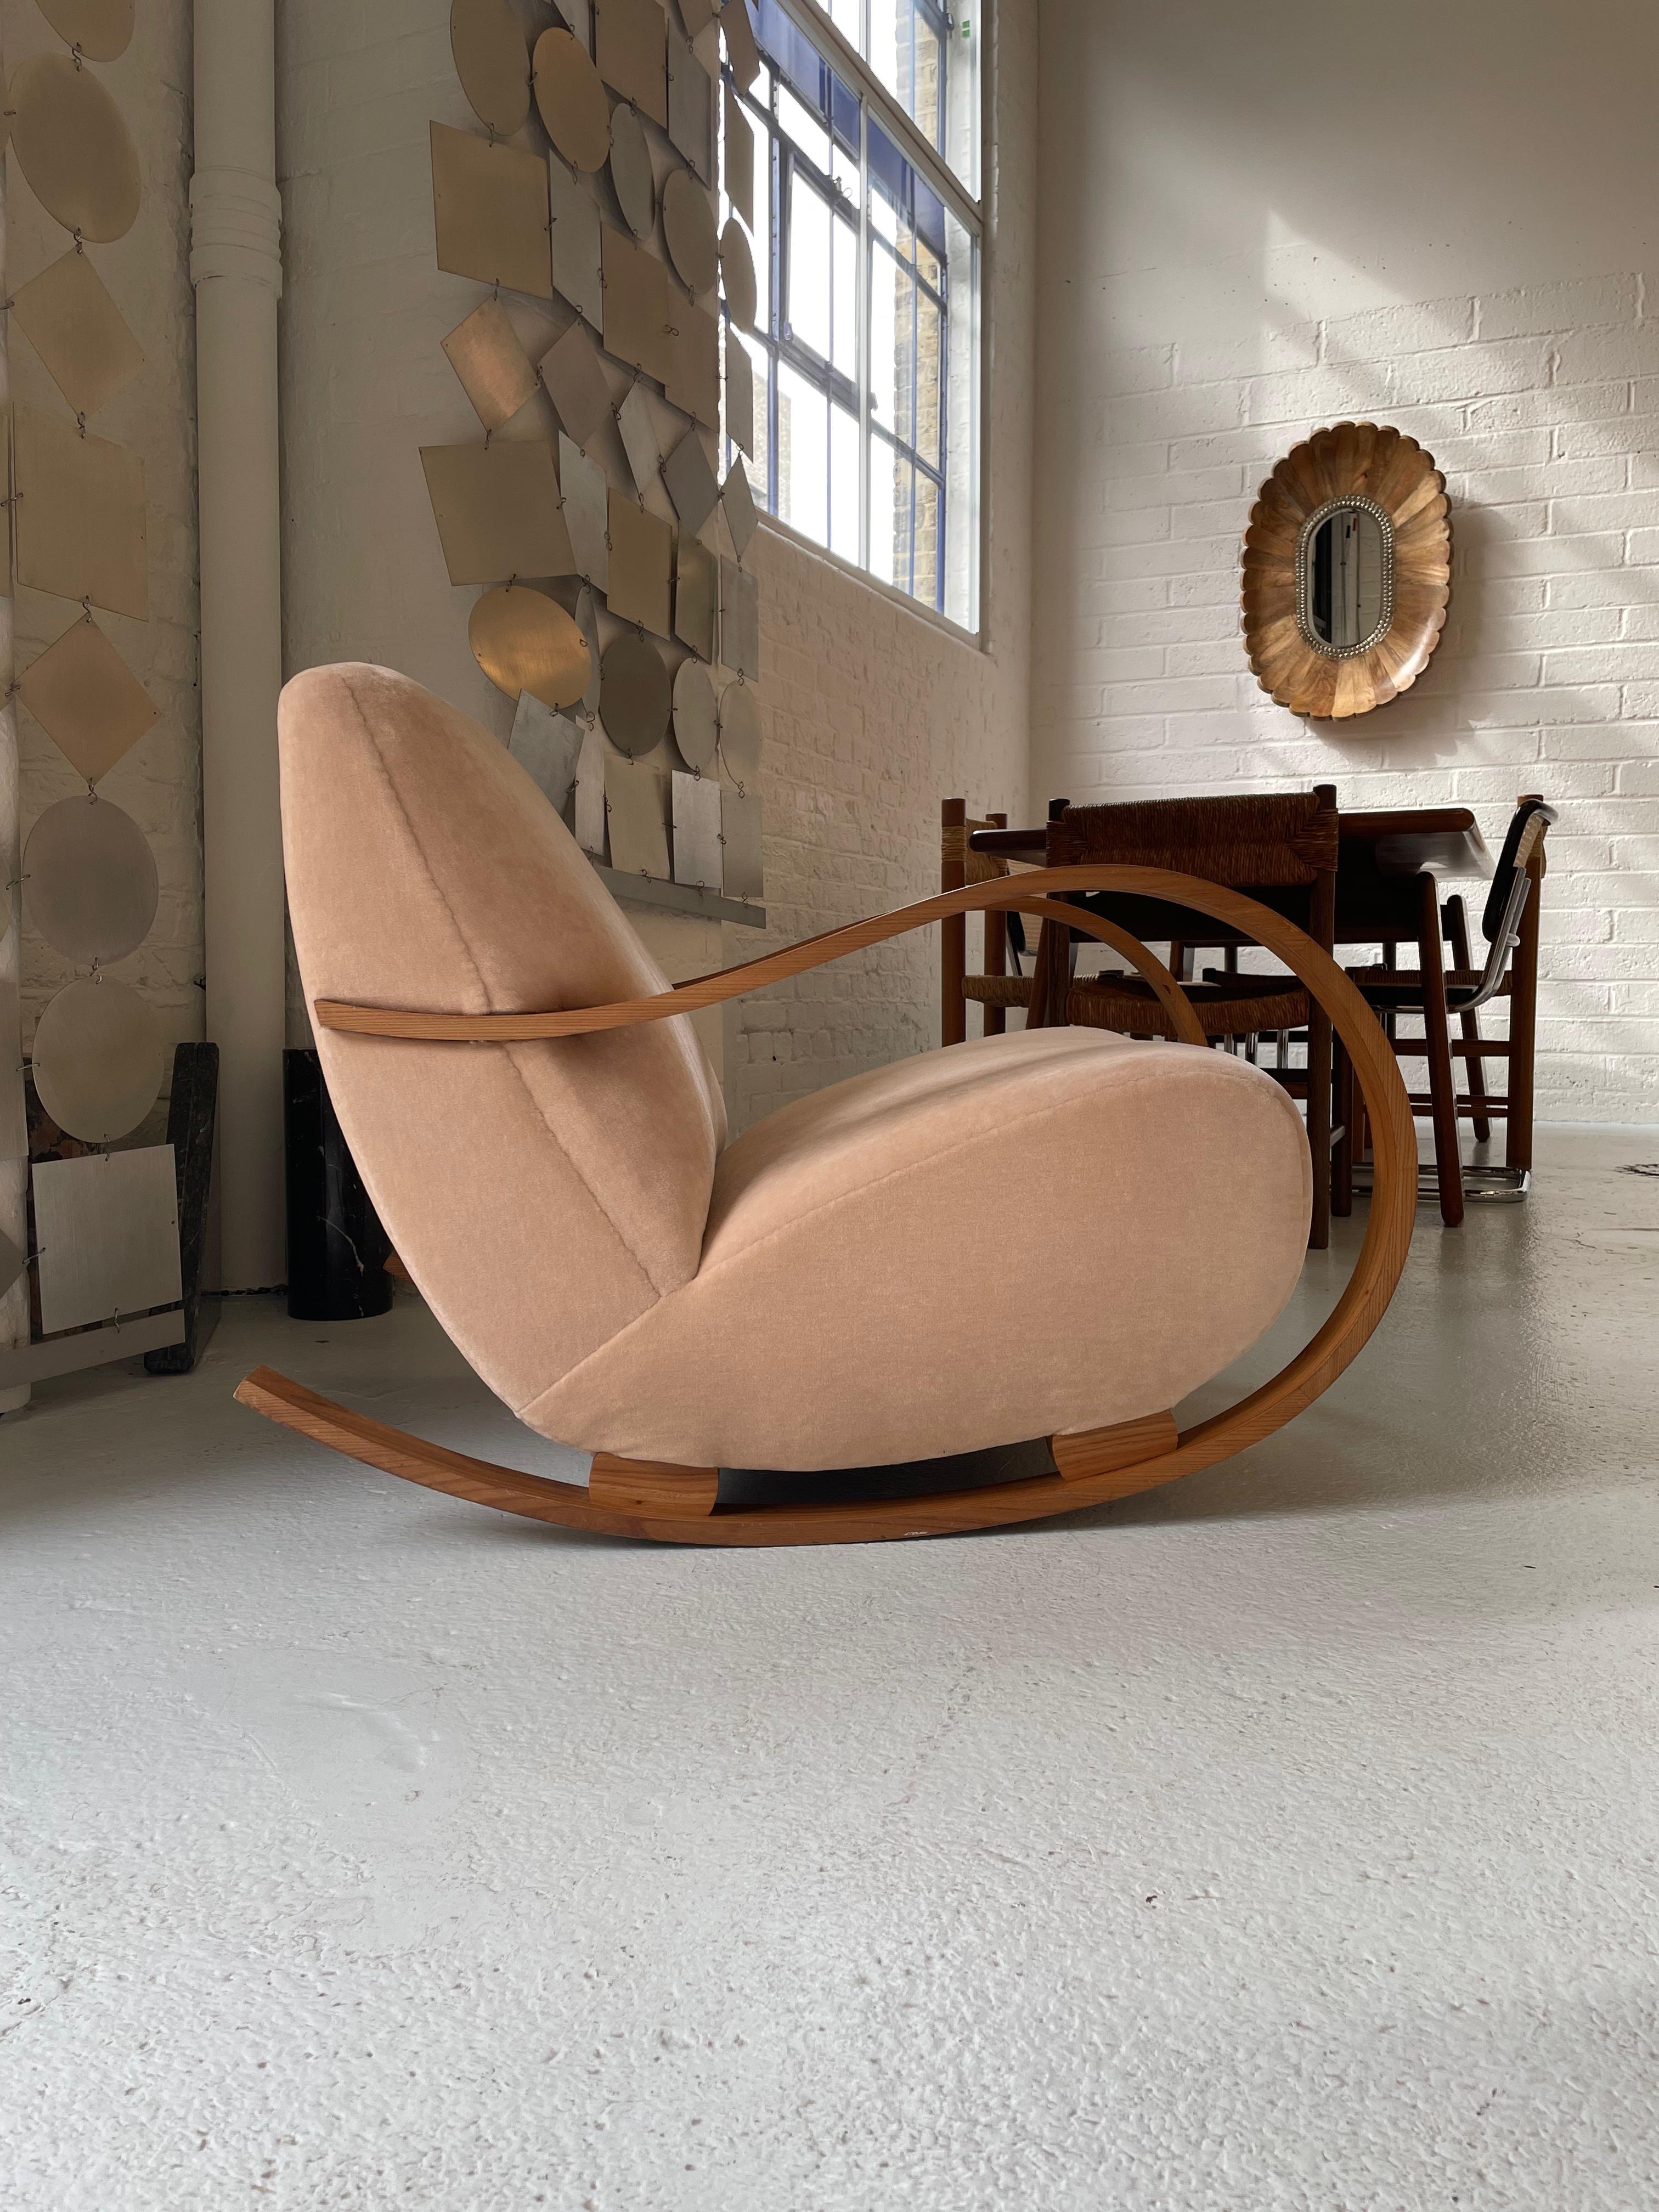 This art deco danish modern rocking chair was produced in the 1940s. It is made of bentwood and features wooden components and spring seats. Completely restored and reupholstered in cotton velvet.
Very comfortable with an appropriate level of give,